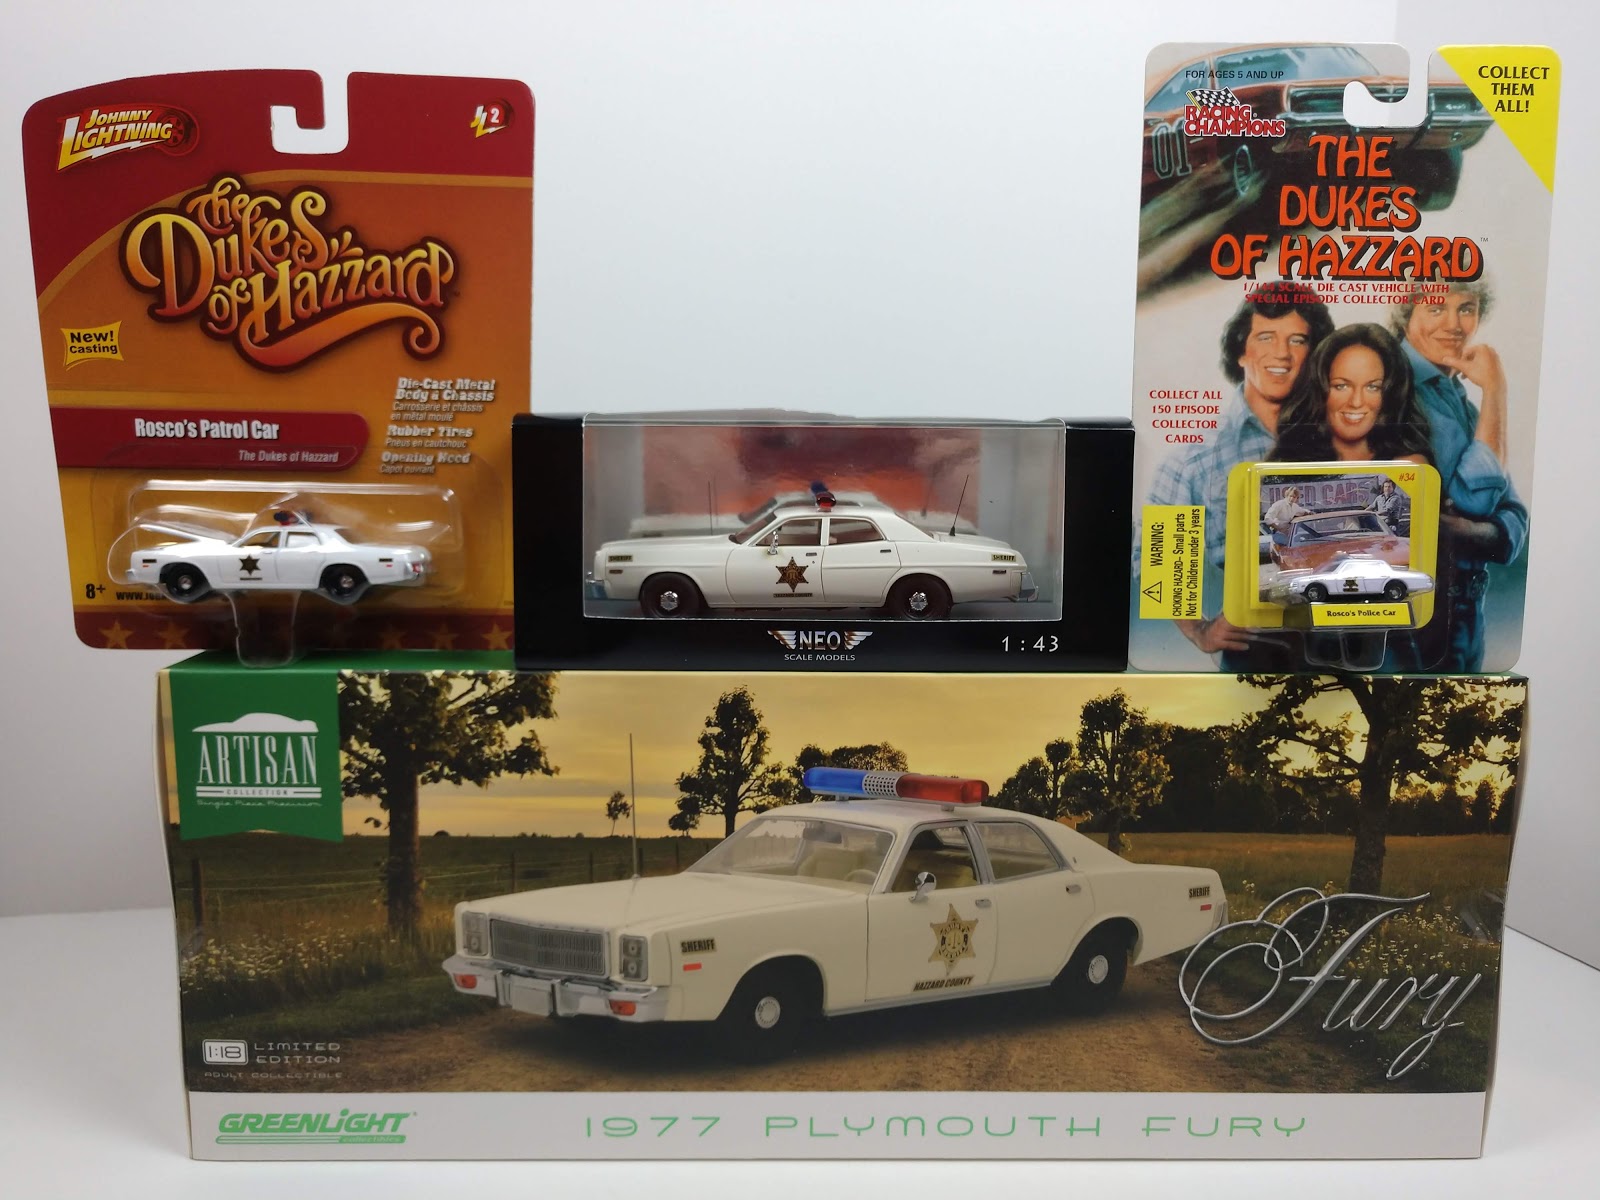  GreenLight Collectibles Artisan Collection - Starsky